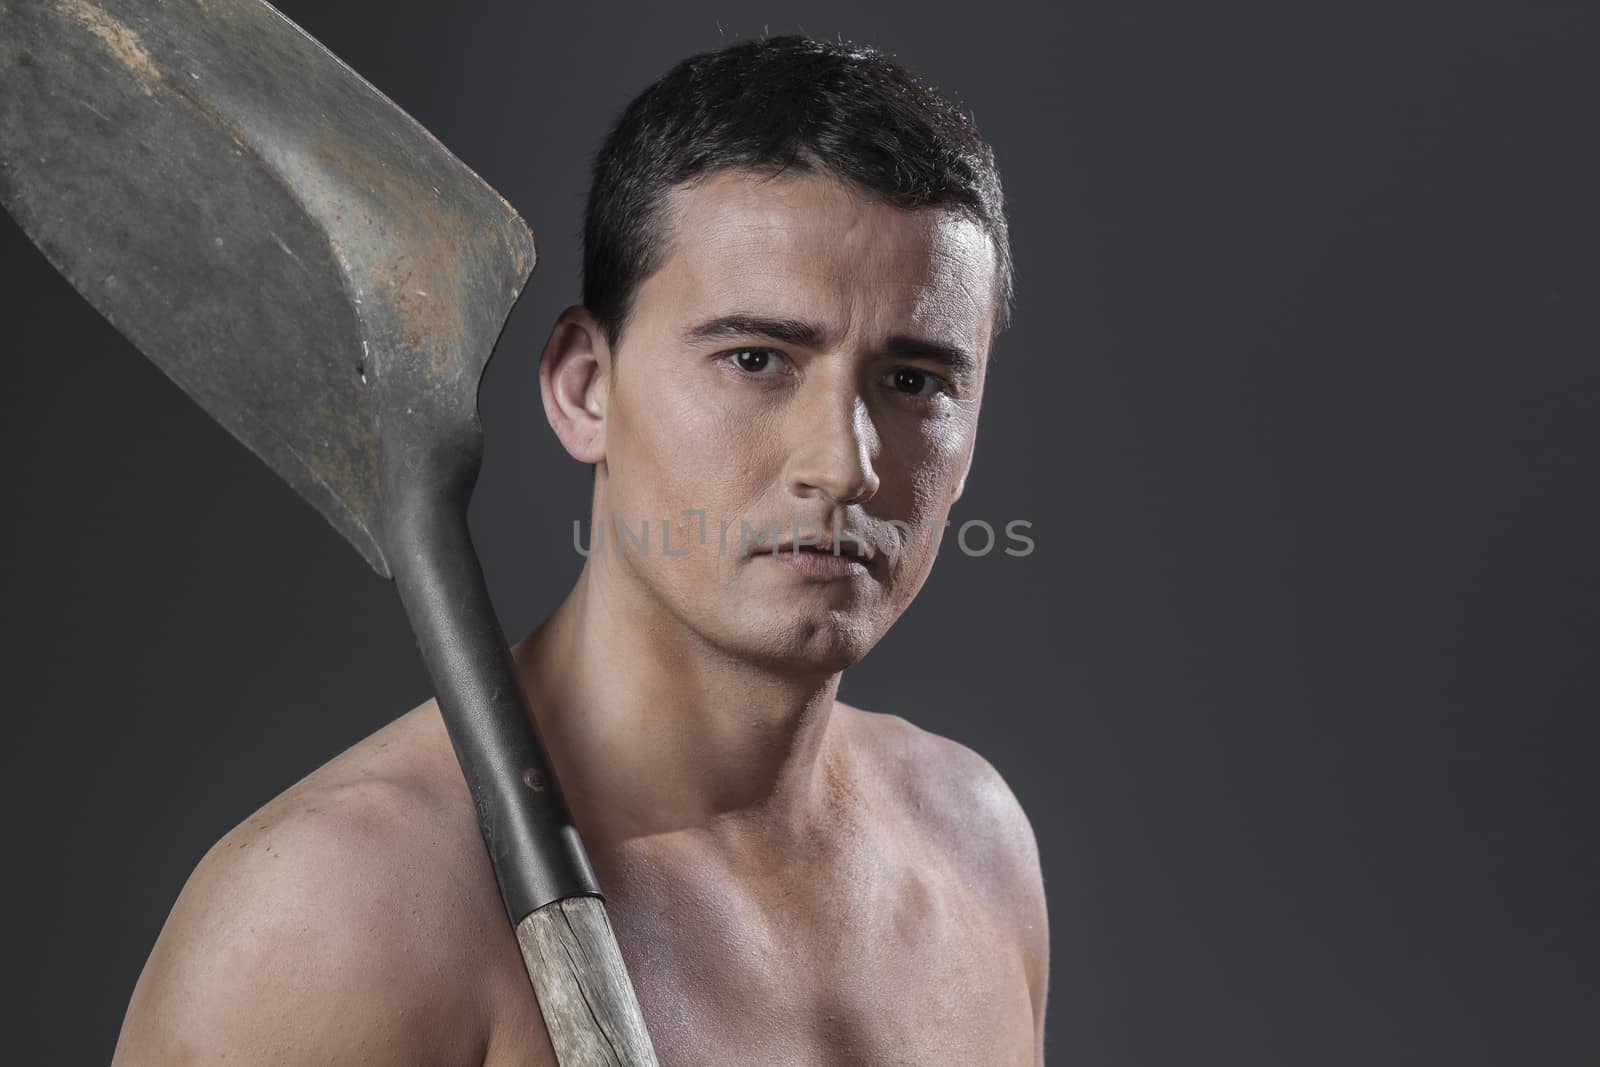 Safety, Male worker holding a shovel, sexy builder